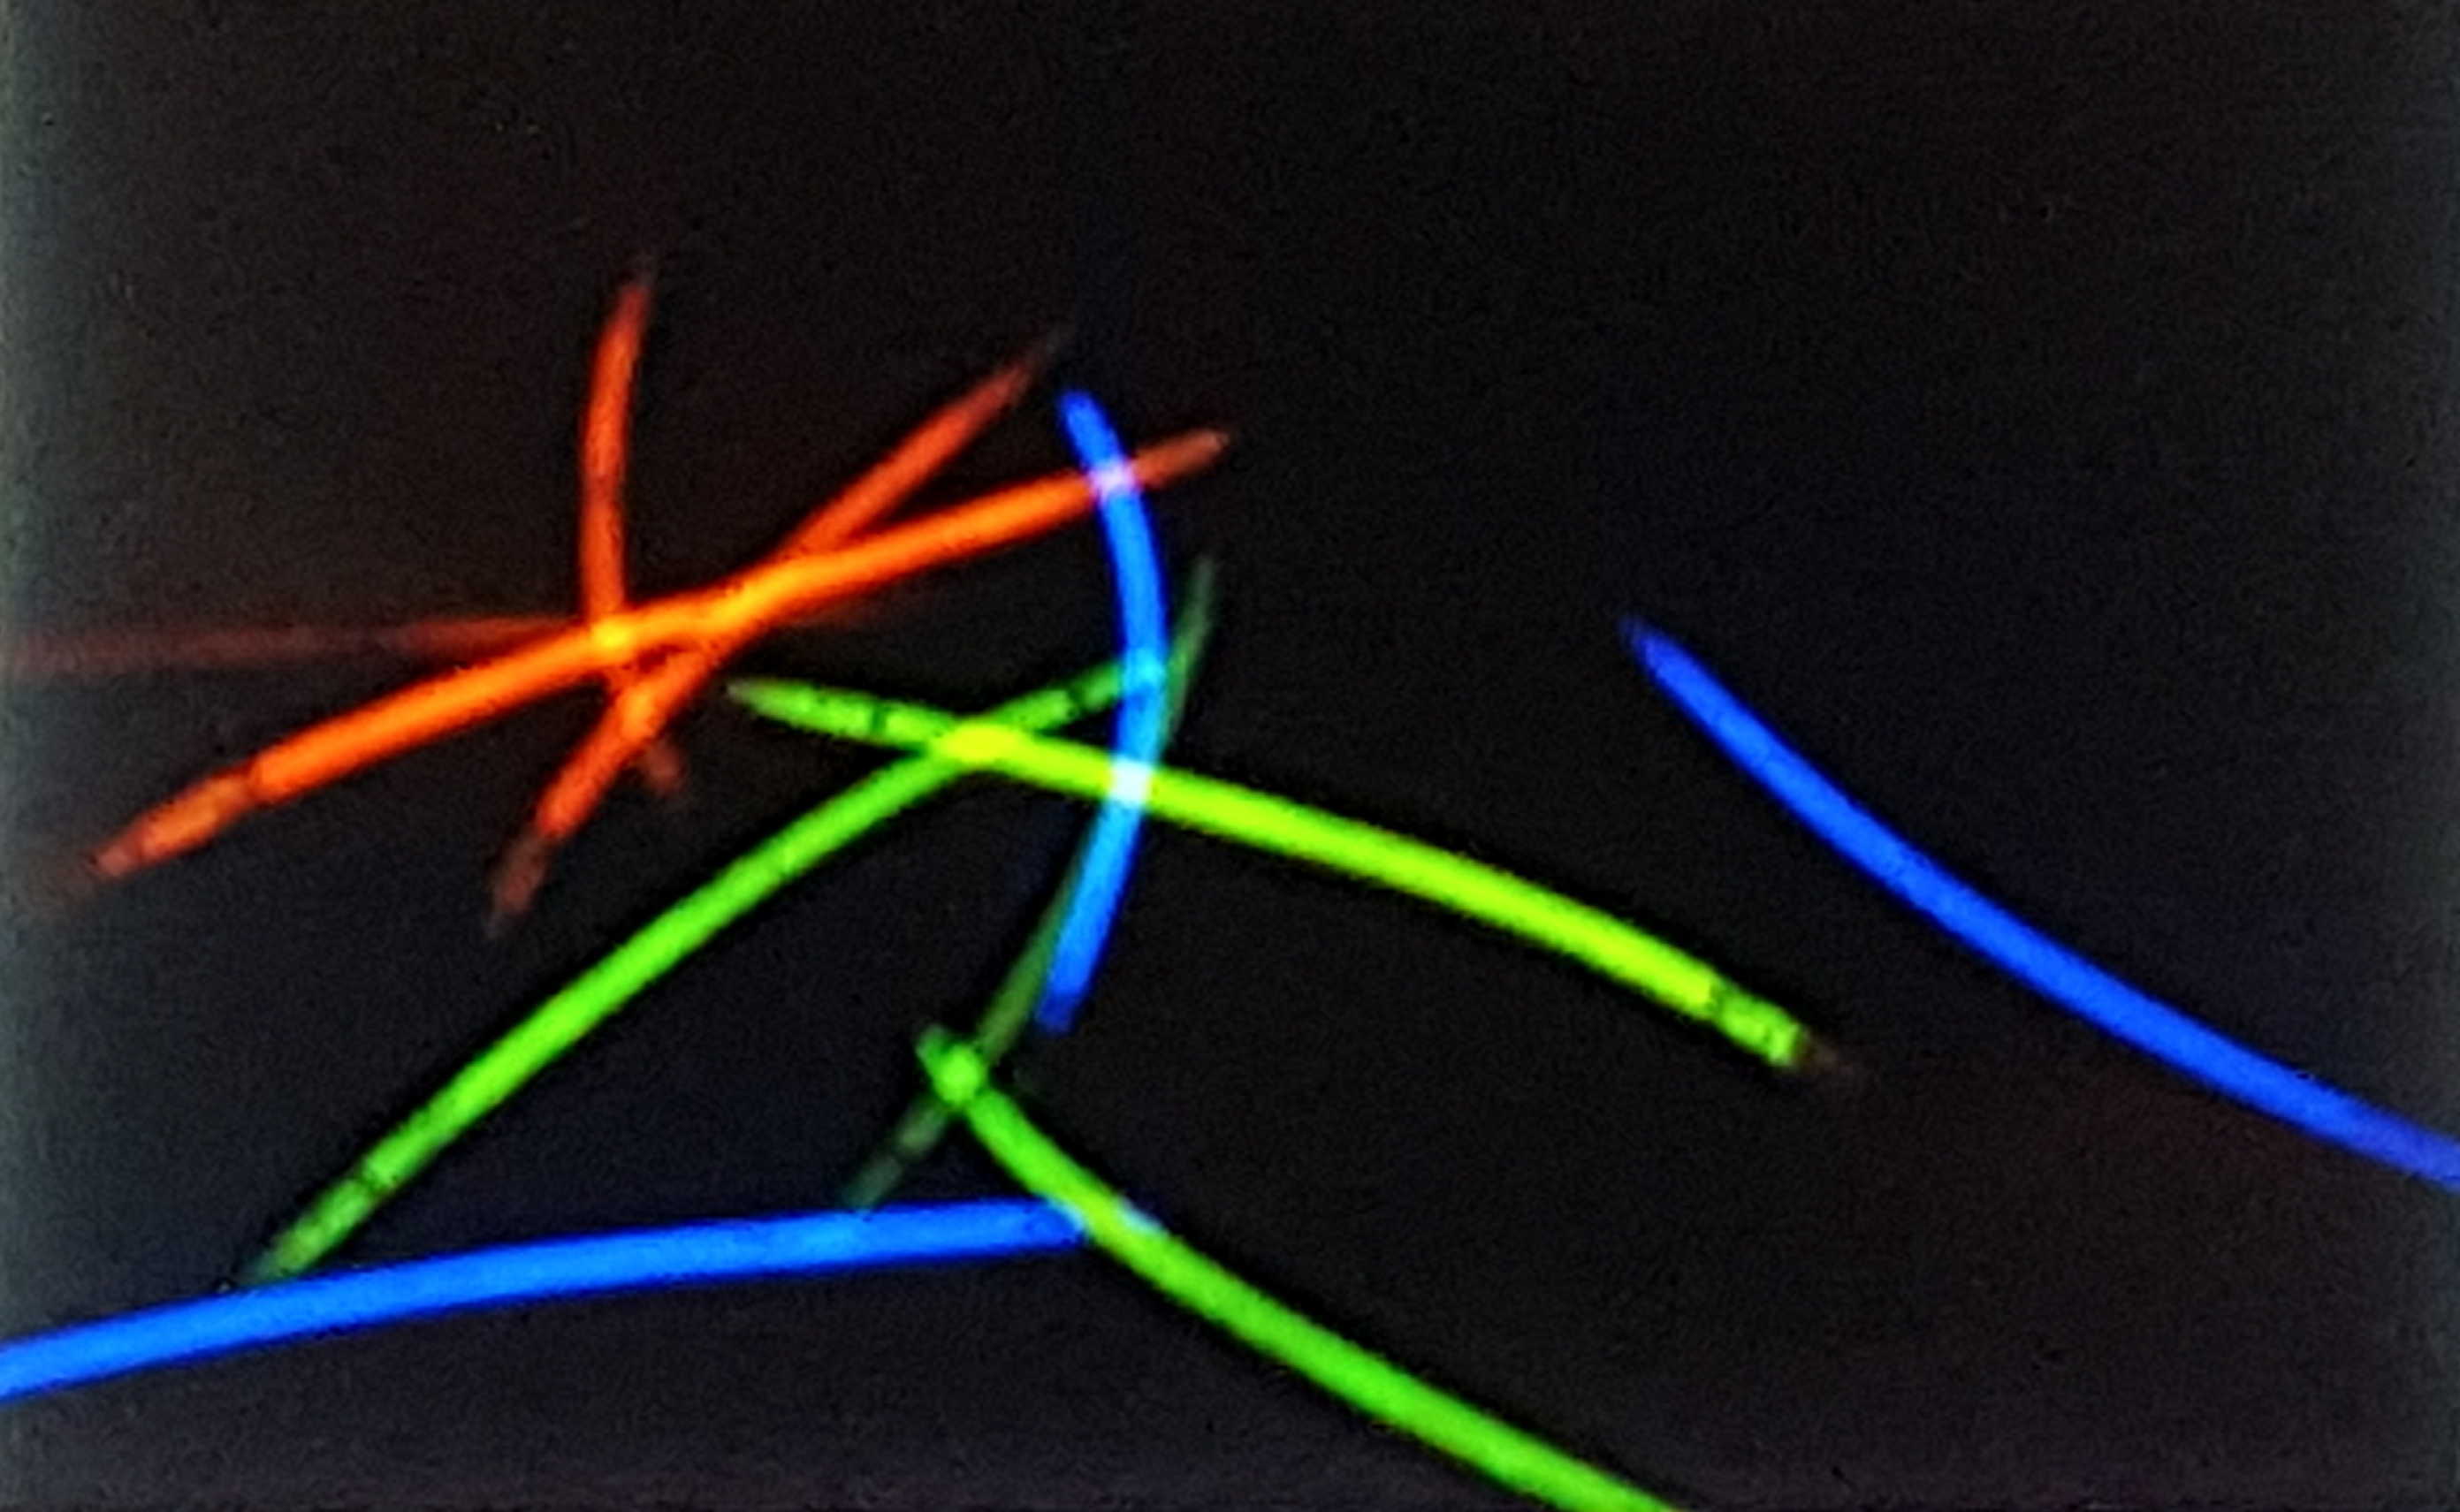 Painting by rearranging glow sticks